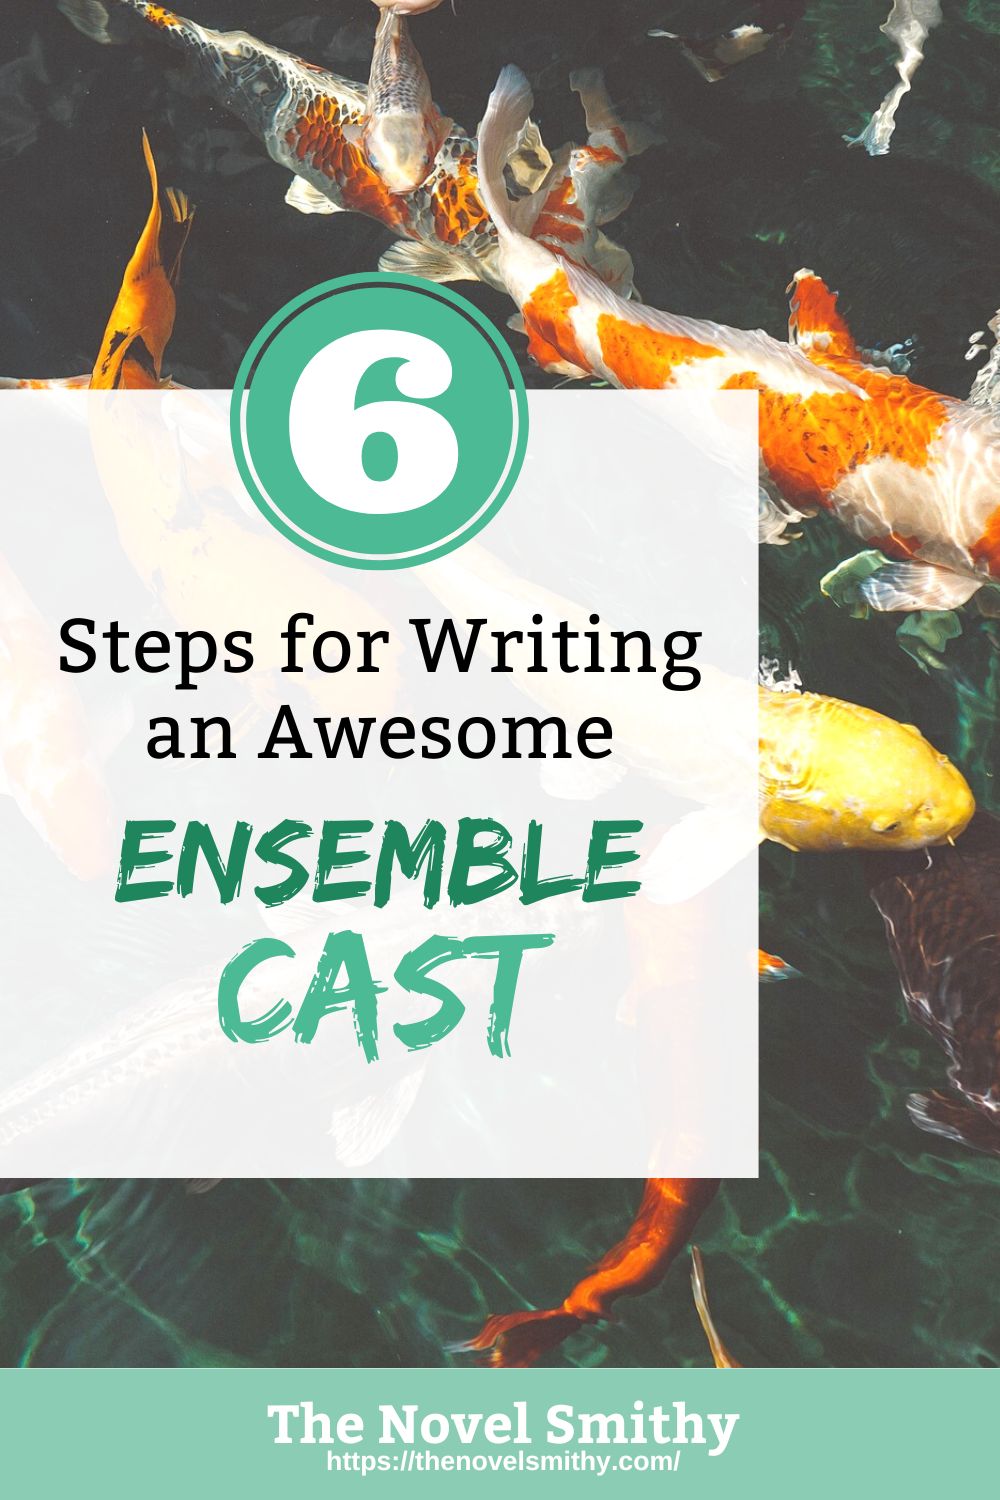 How to Write an Awesome Ensemble Cast